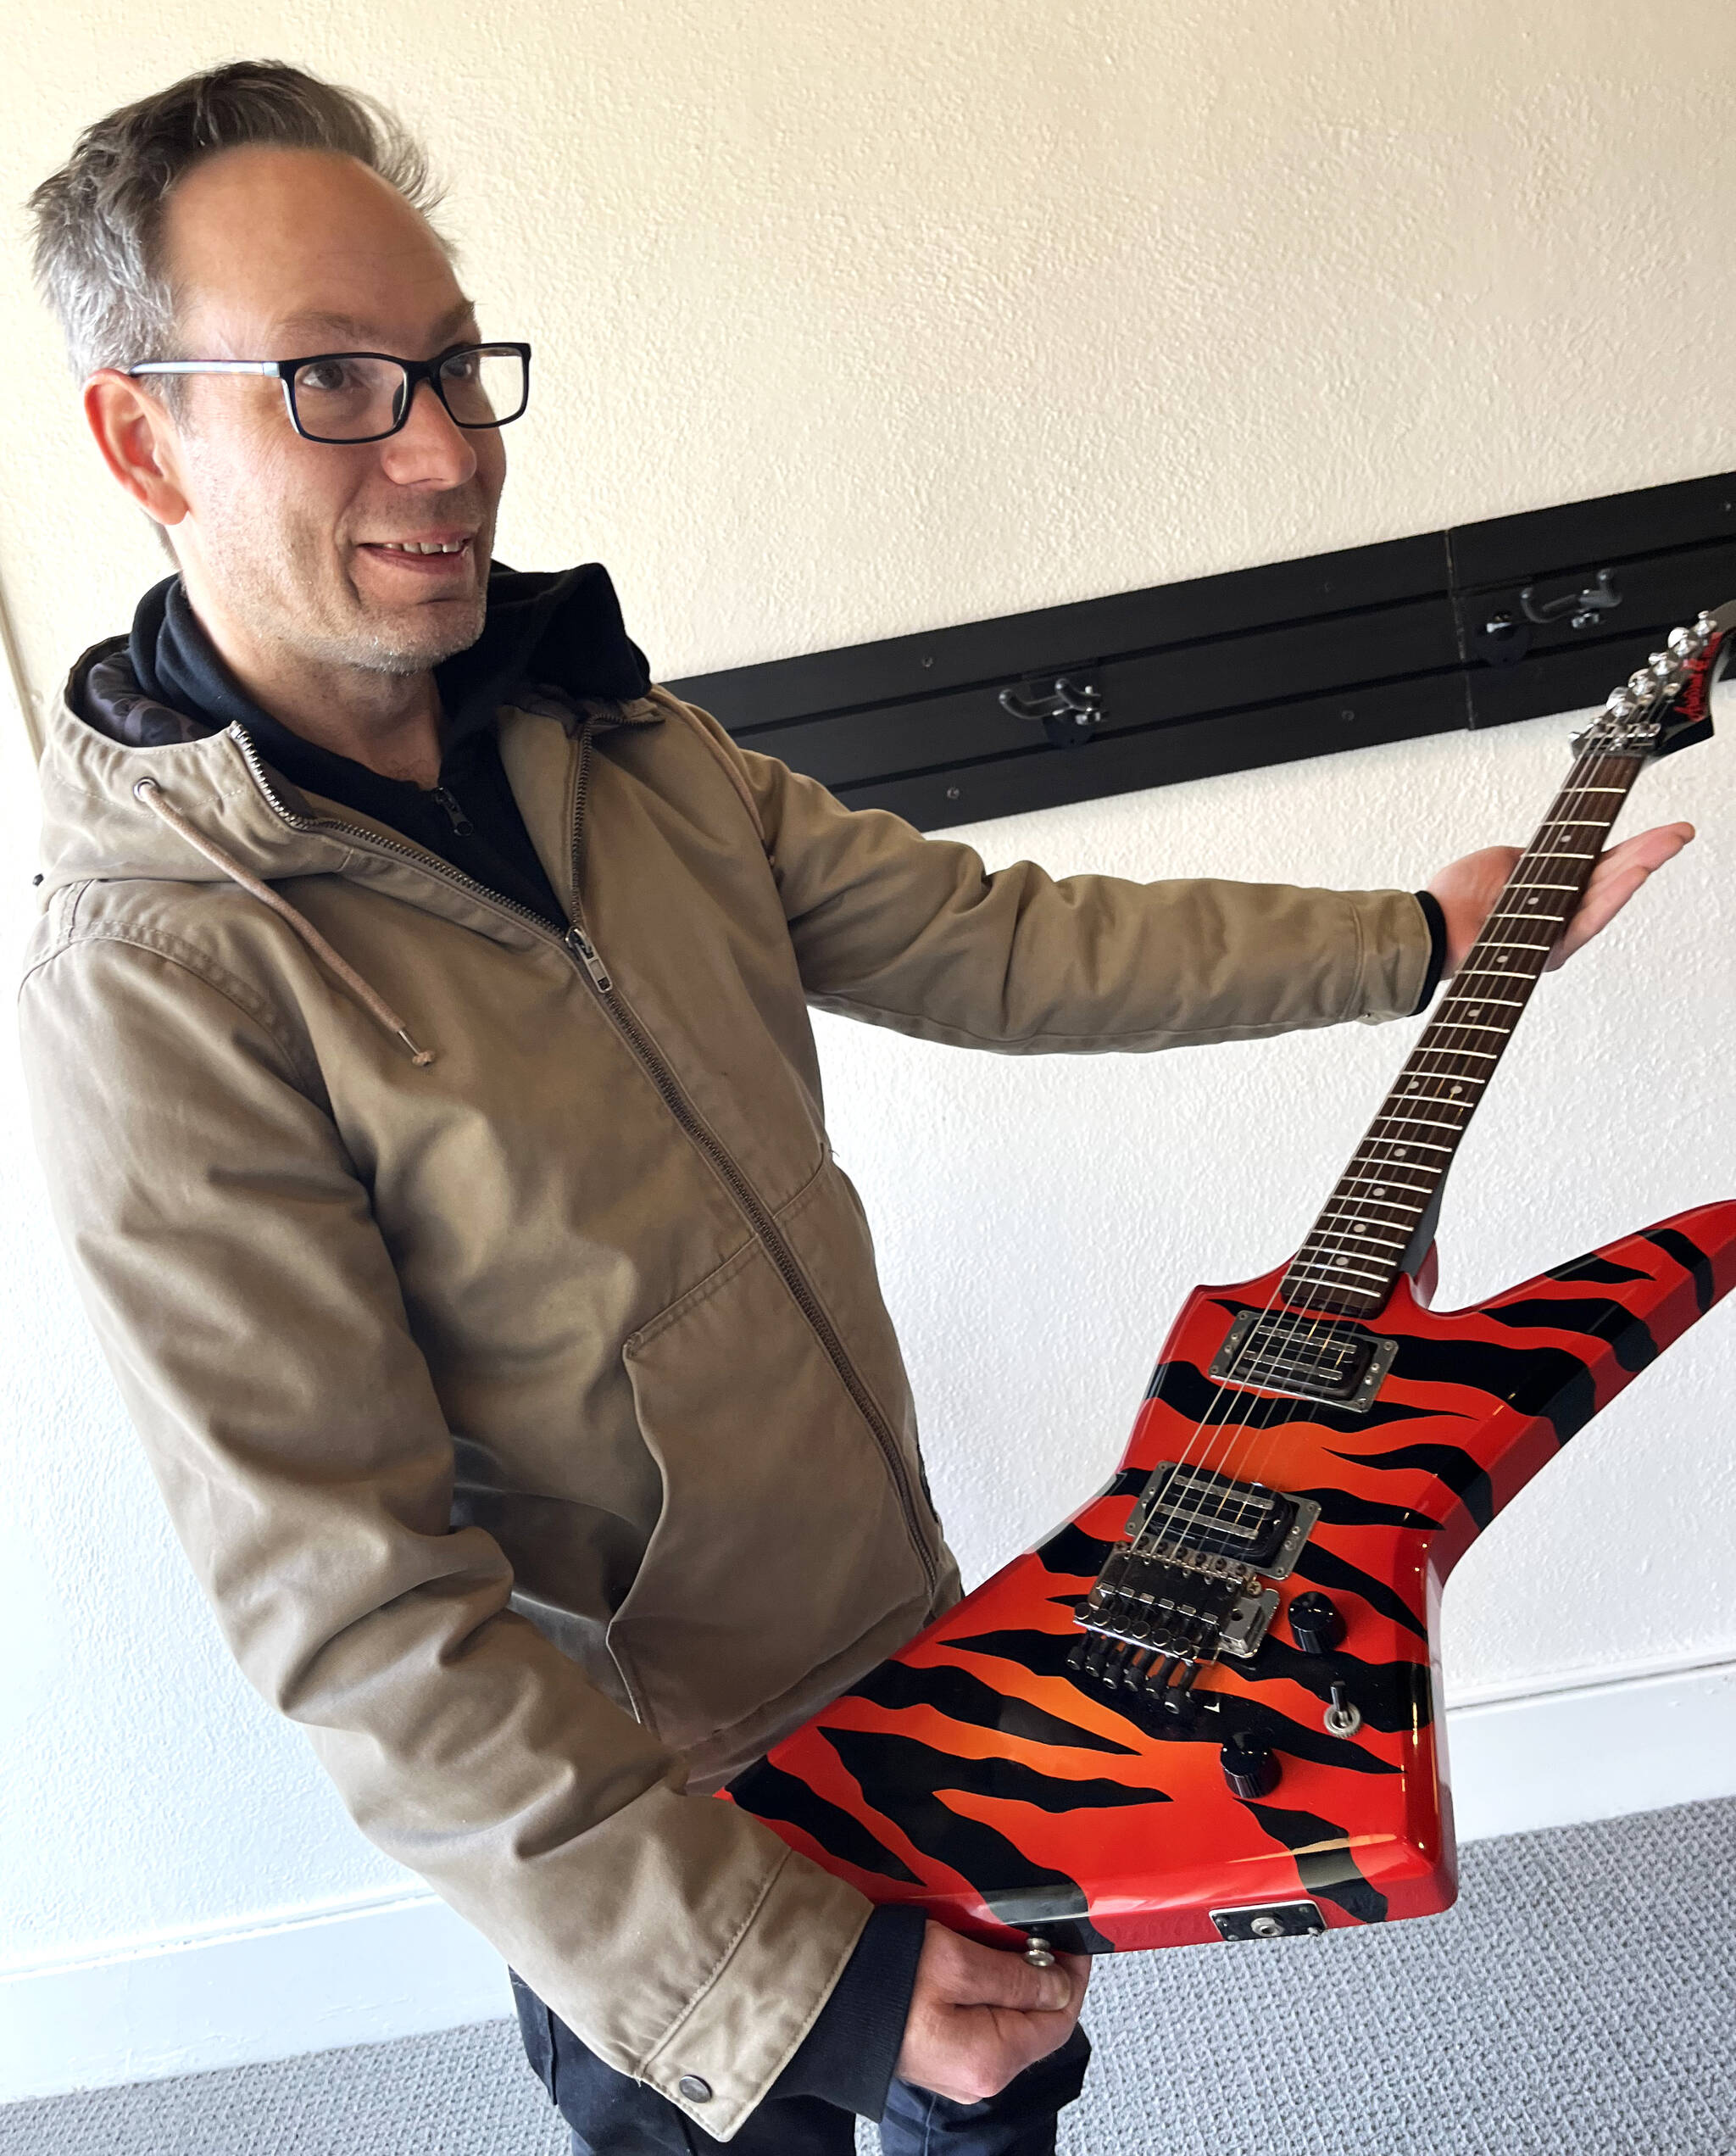 Joe Backus, co-owner of Guitar Galactica, shows off one of the “funky” guitars he’s collected through more than 30 years. This striking tiger-striped Aria Pro II, from Japan, stood out visually on Wednesday when The Daily World spoke to Backus and his business partner Ron Harless. The shop — 204 S. K St., — should open in April. Backus and Harless, who have decades of music store experience in Seattle, can’t wait to get started in downtown Aberdeen.